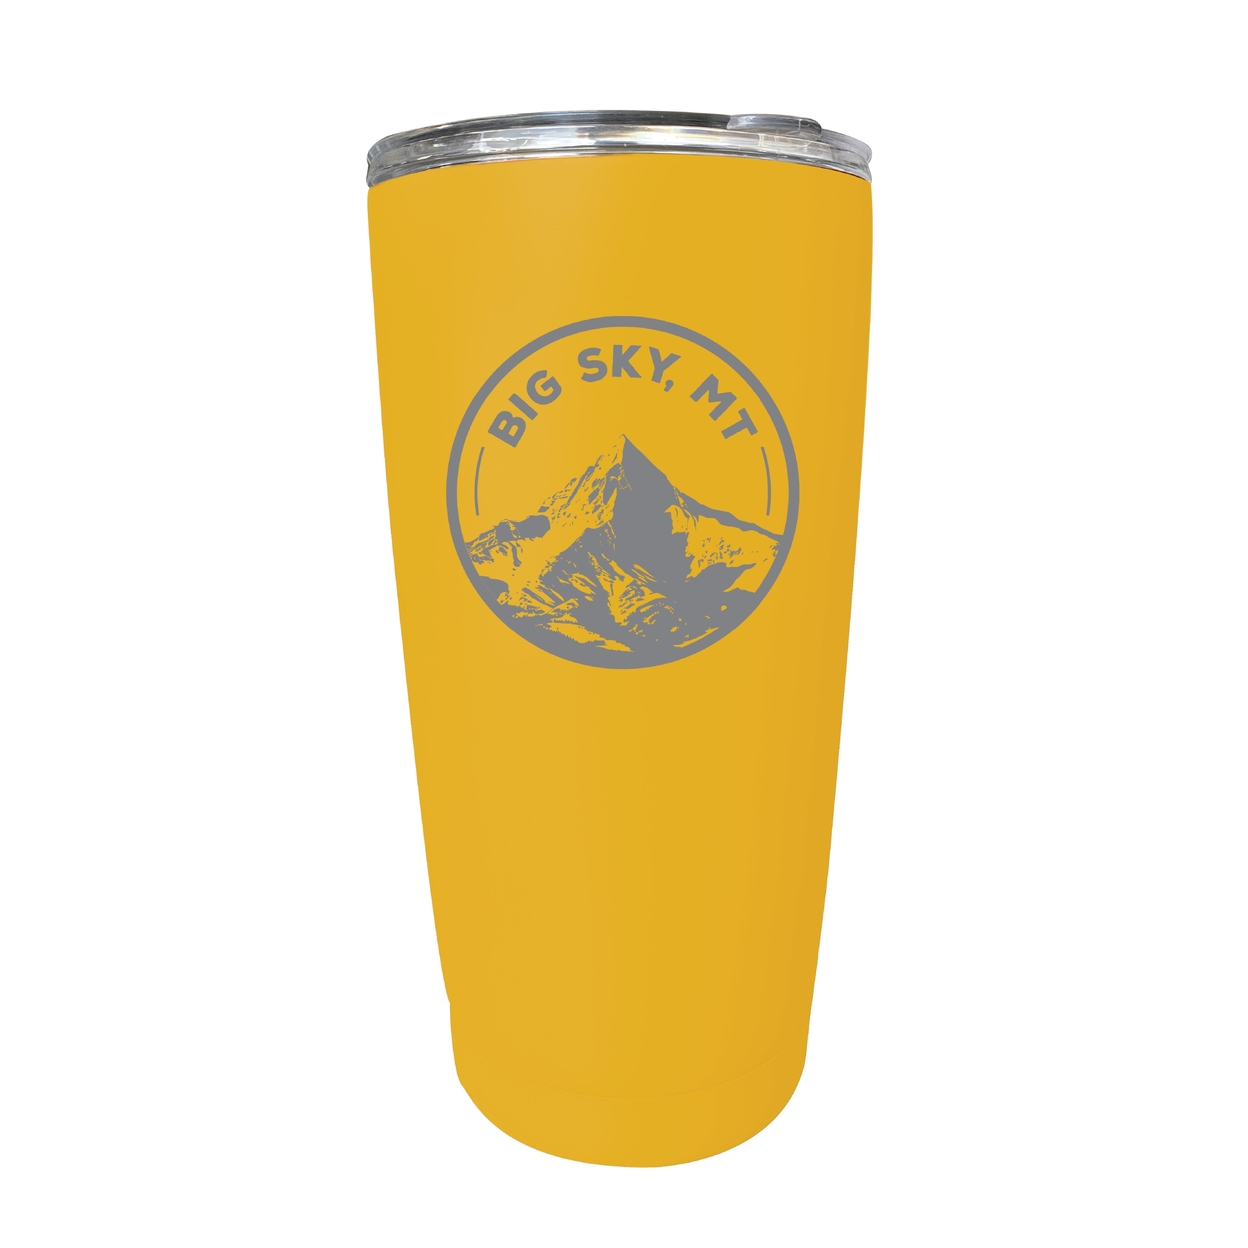 Big Sky Montana Souvenir 16 Oz Engraved Stainless Steel Insulated Tumbler - Yellow,,2-Pack